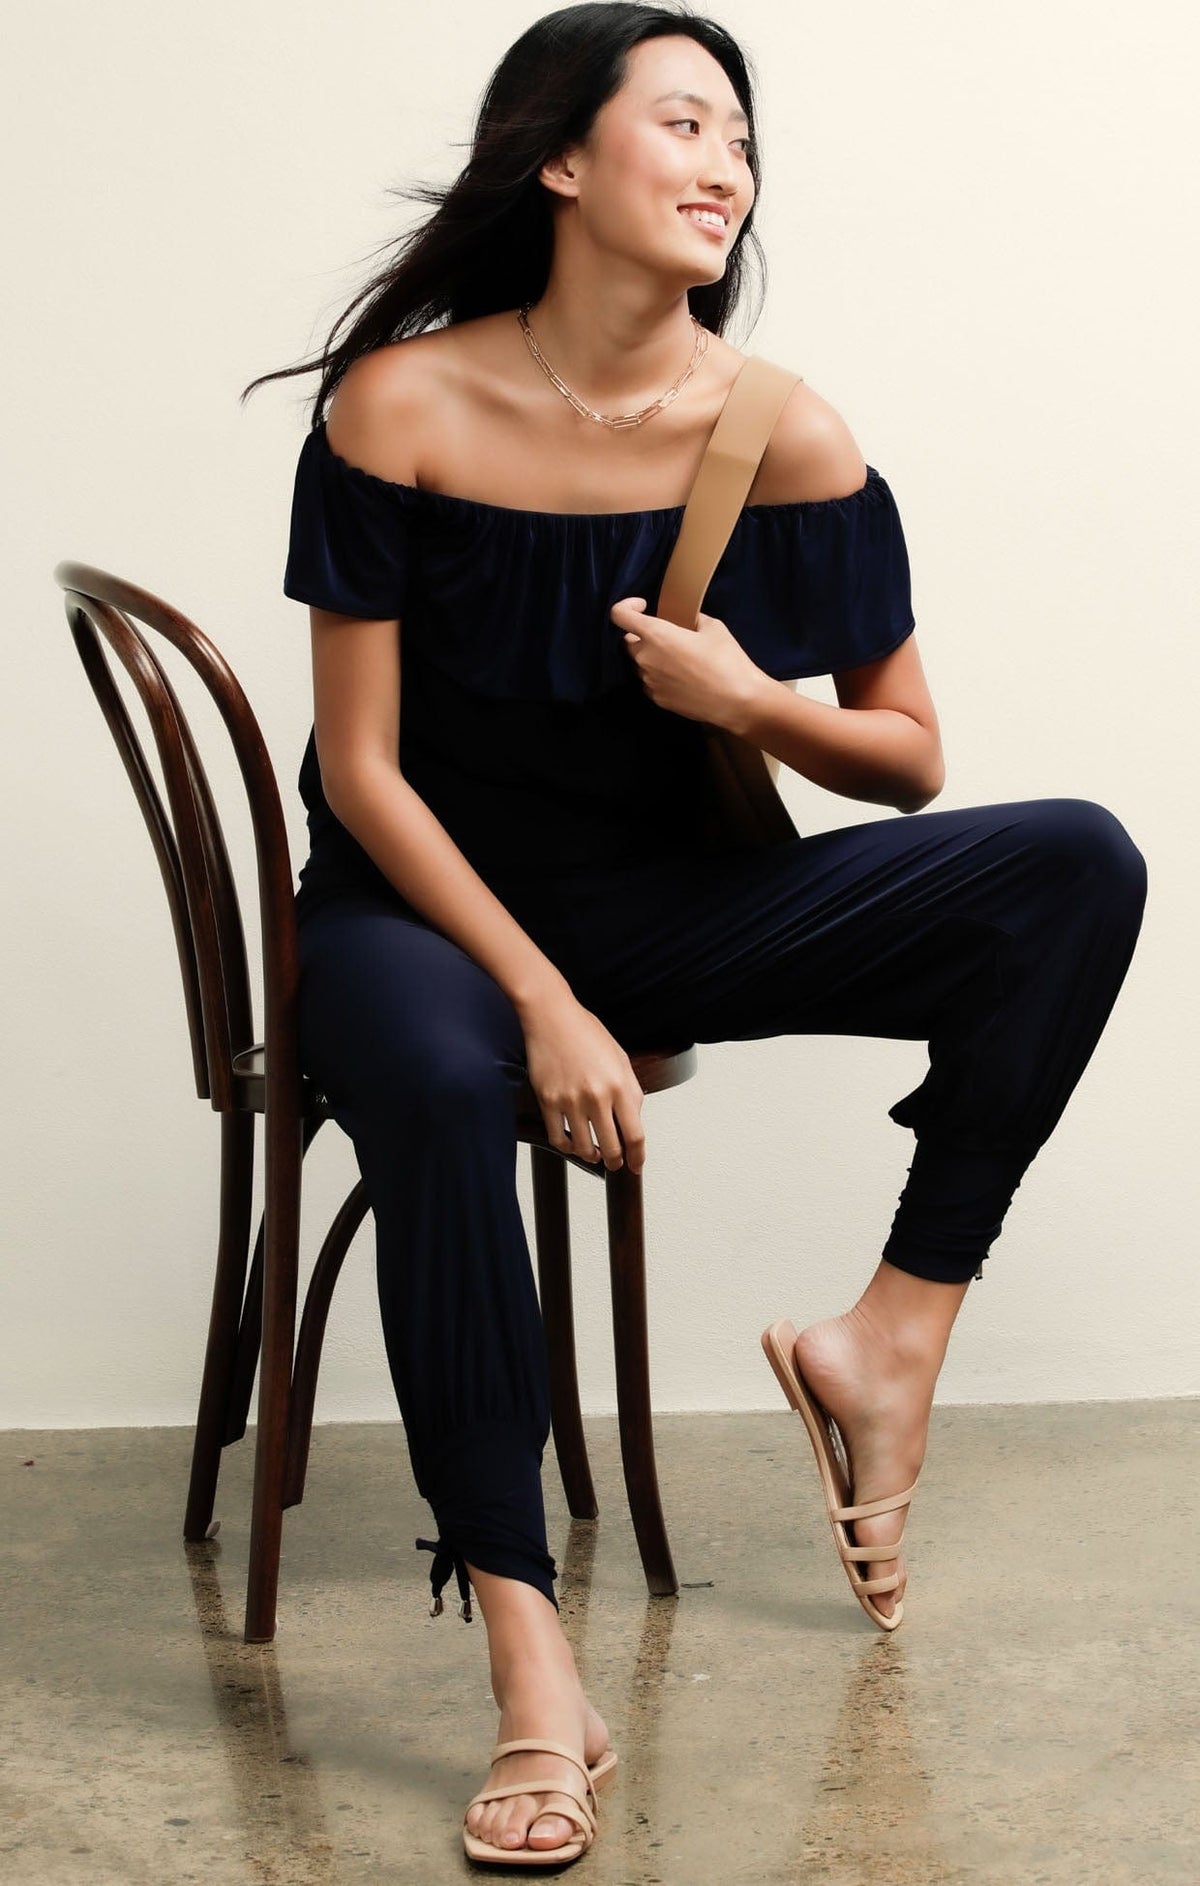 Tops Multi Occasion OFF SHOULDER FRILL TOP IN NAVY